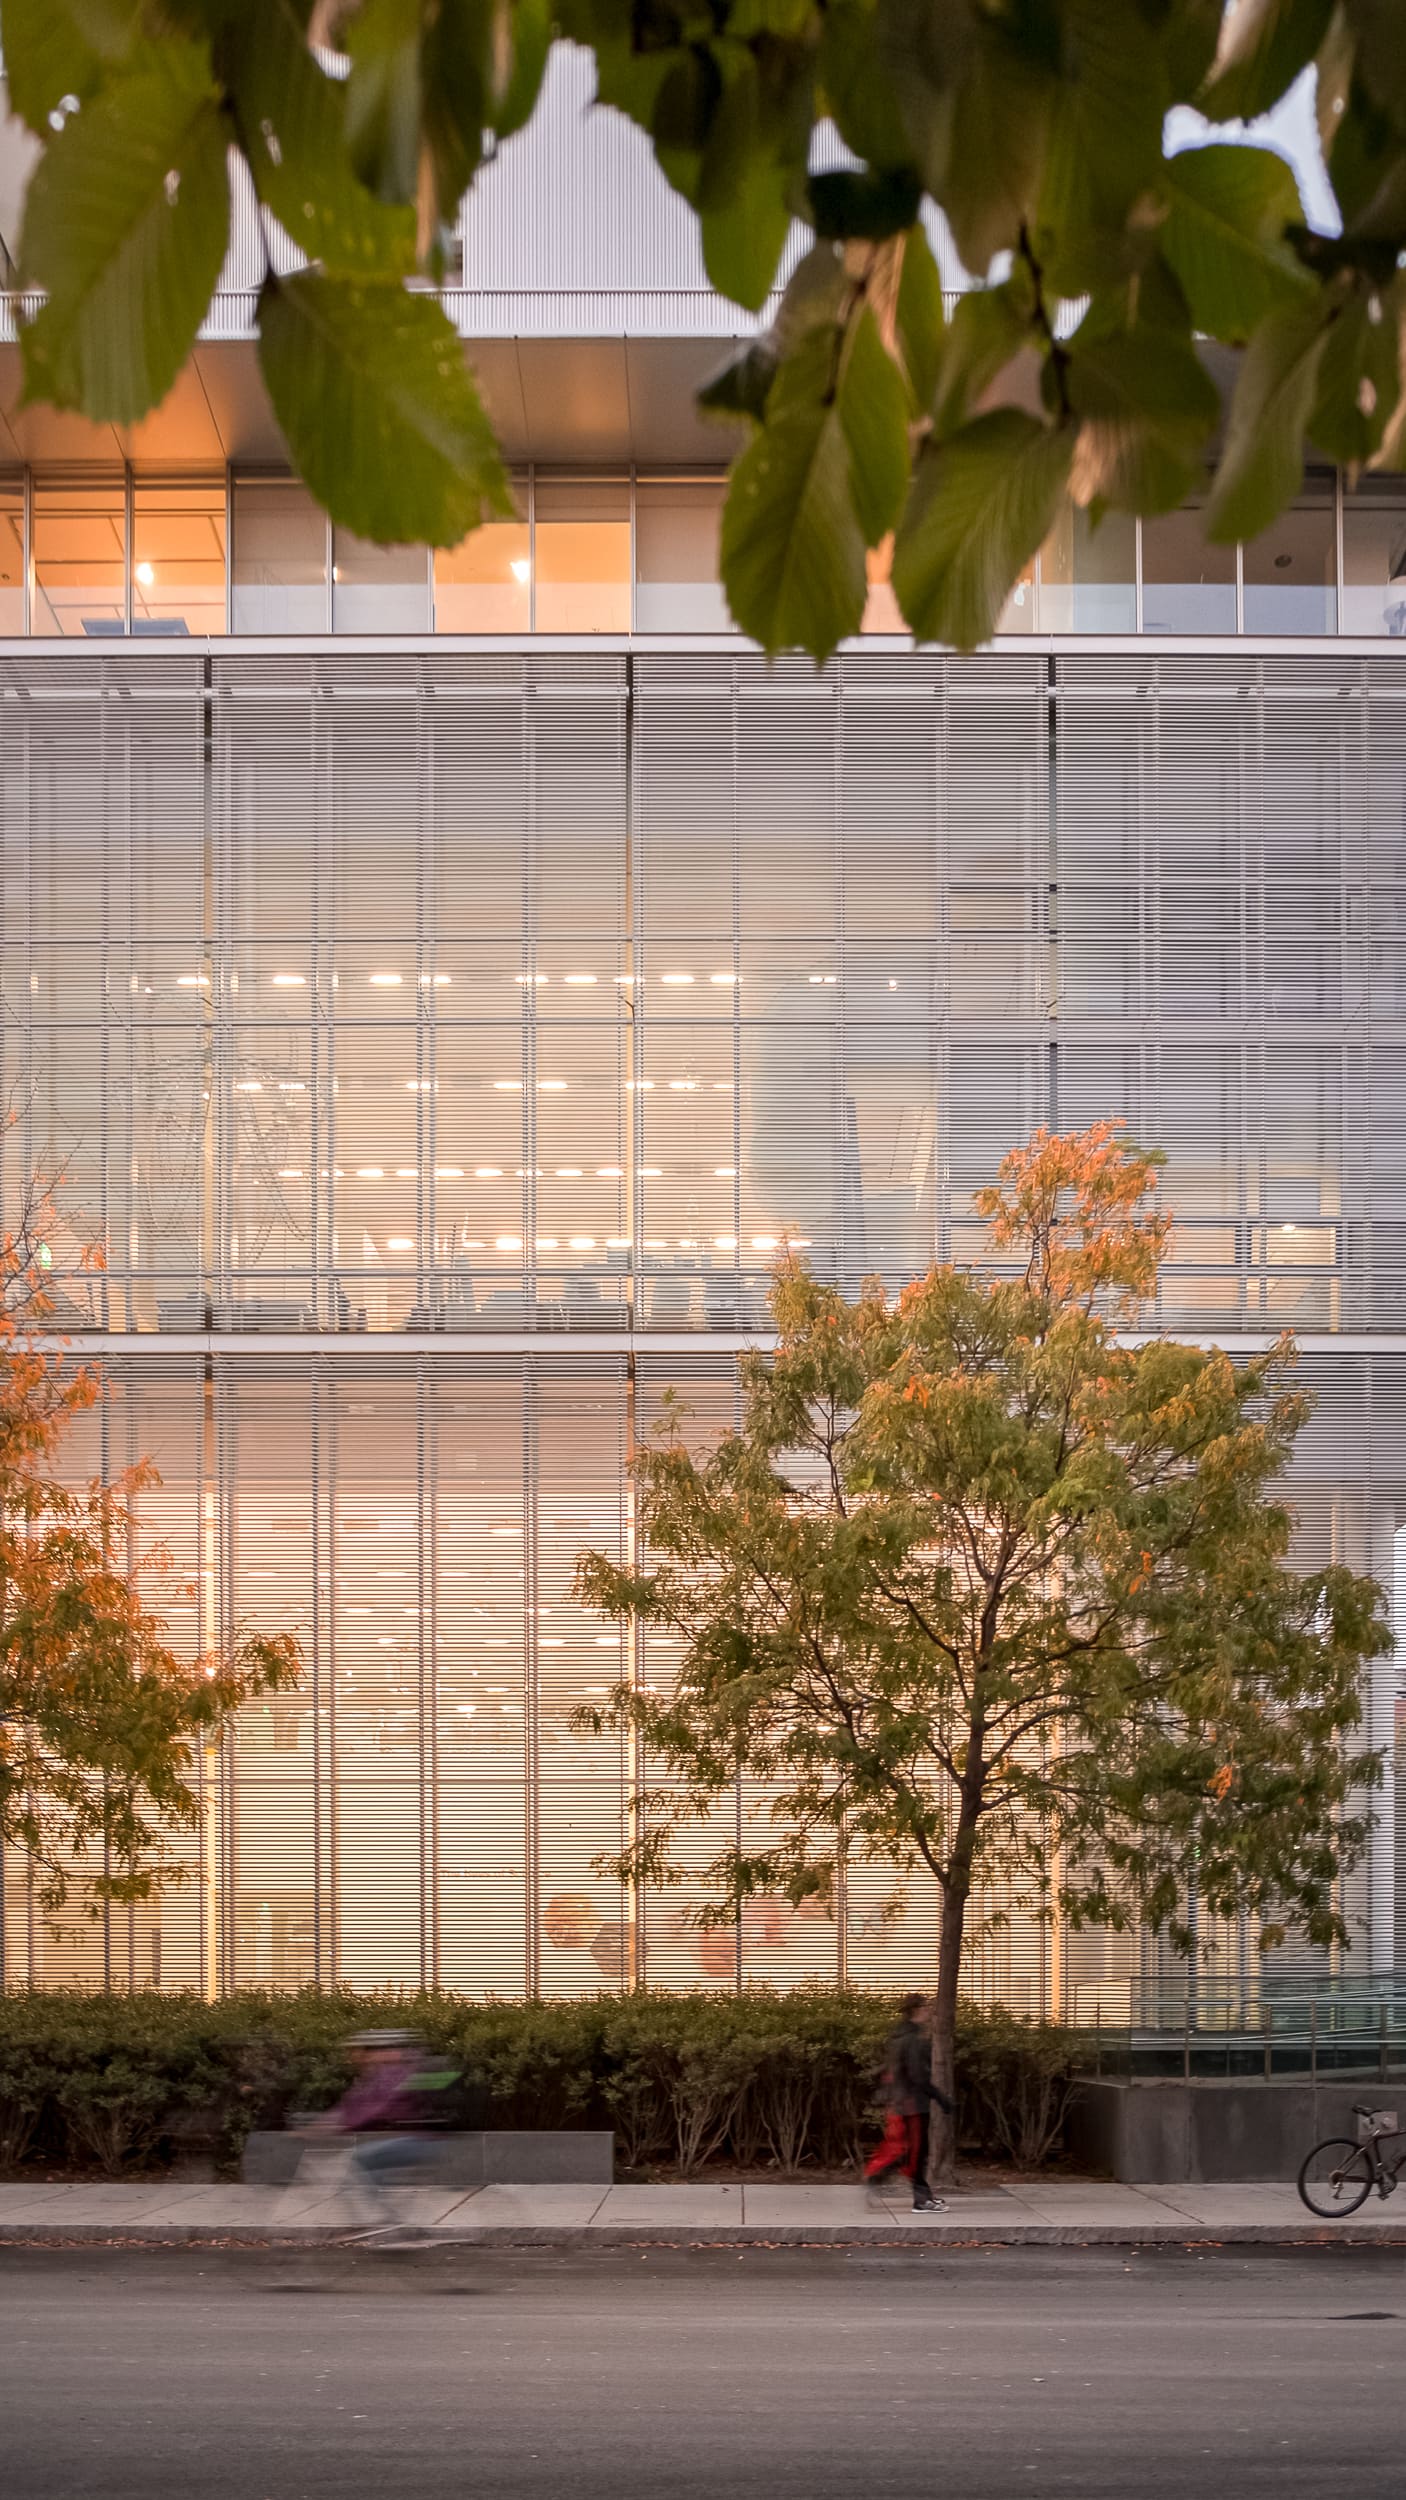 Architectural photography of the MIT Media Lab in Boston Massachusetts designed by Fumihiko Maki and Associates featuring a one point perspective vignette of the space with a bicyclist and pedestrians passing by